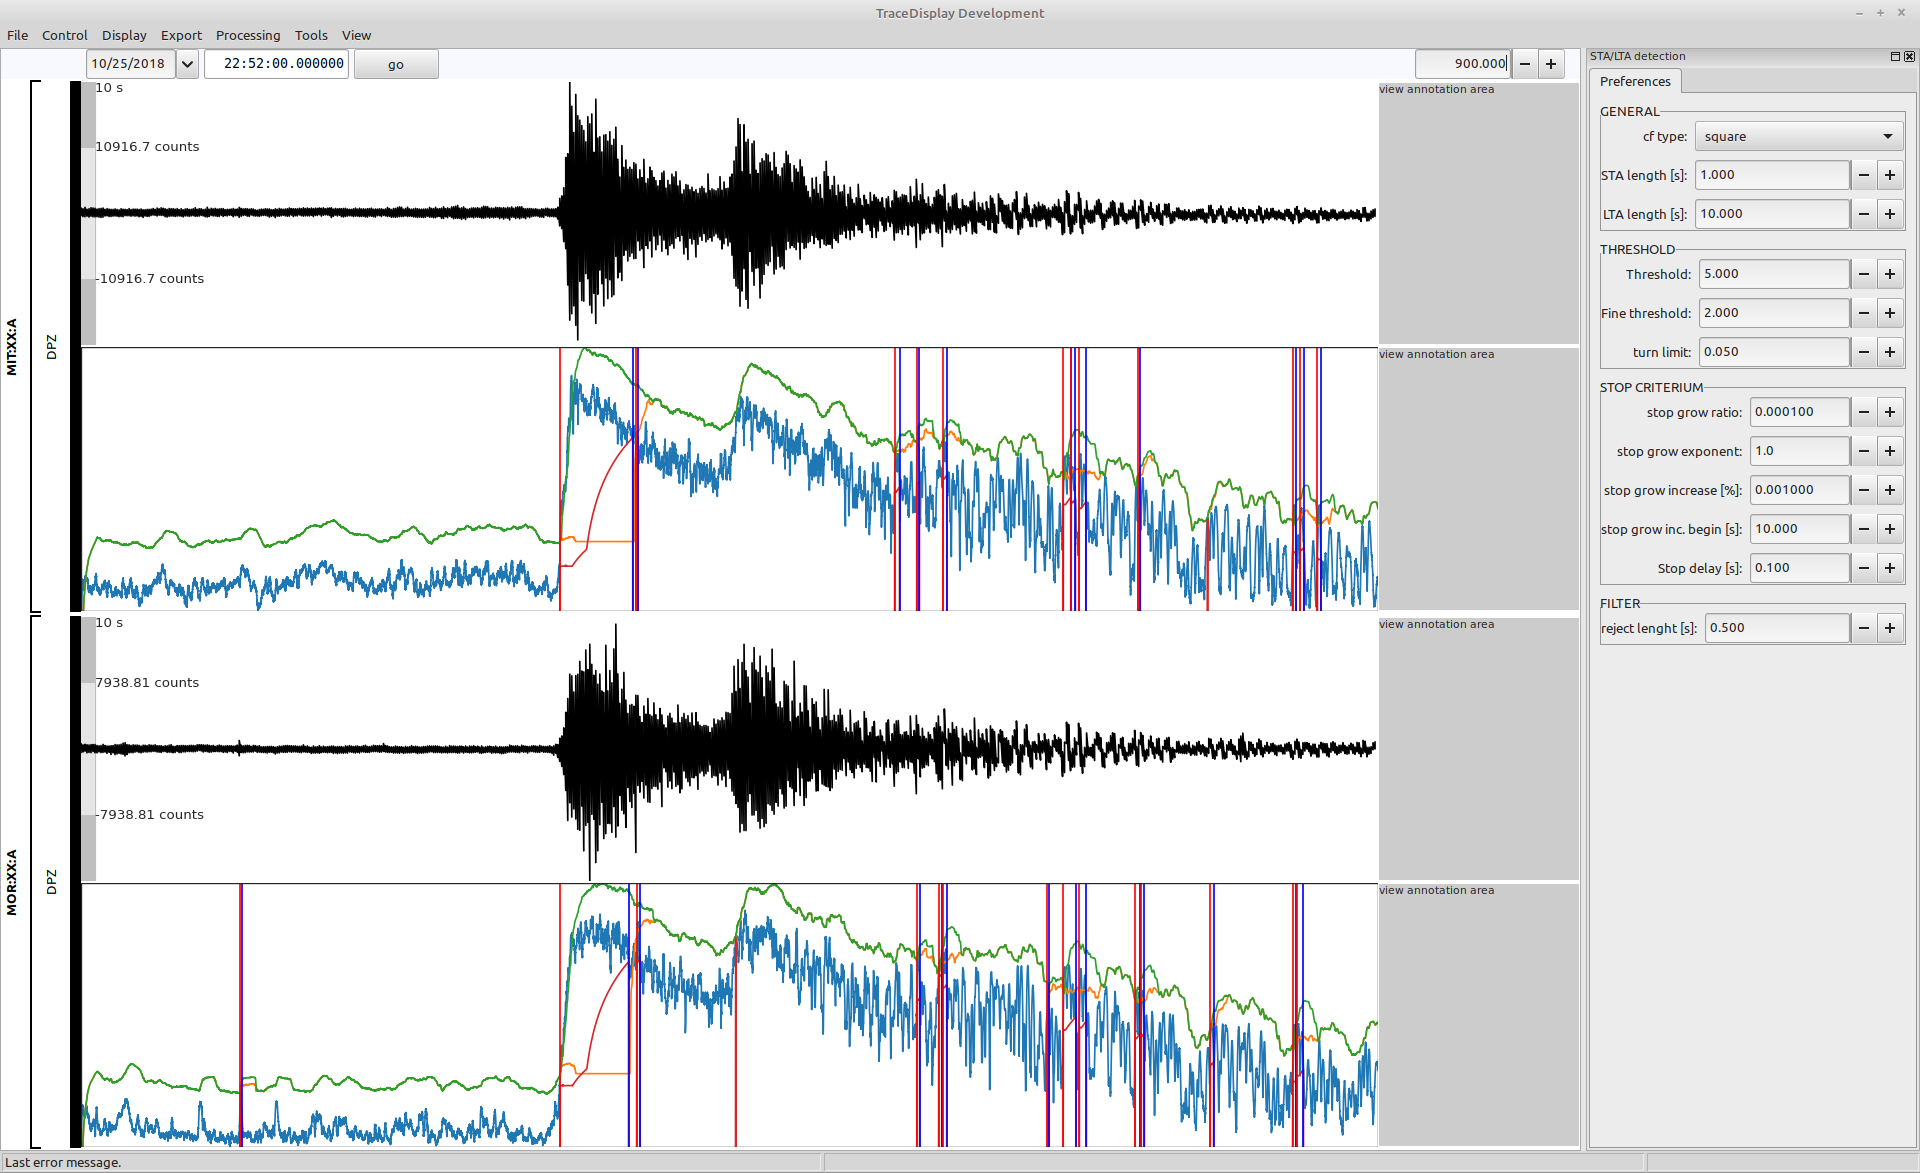 The performance of the STA/LTA detection with an earthquake signal.